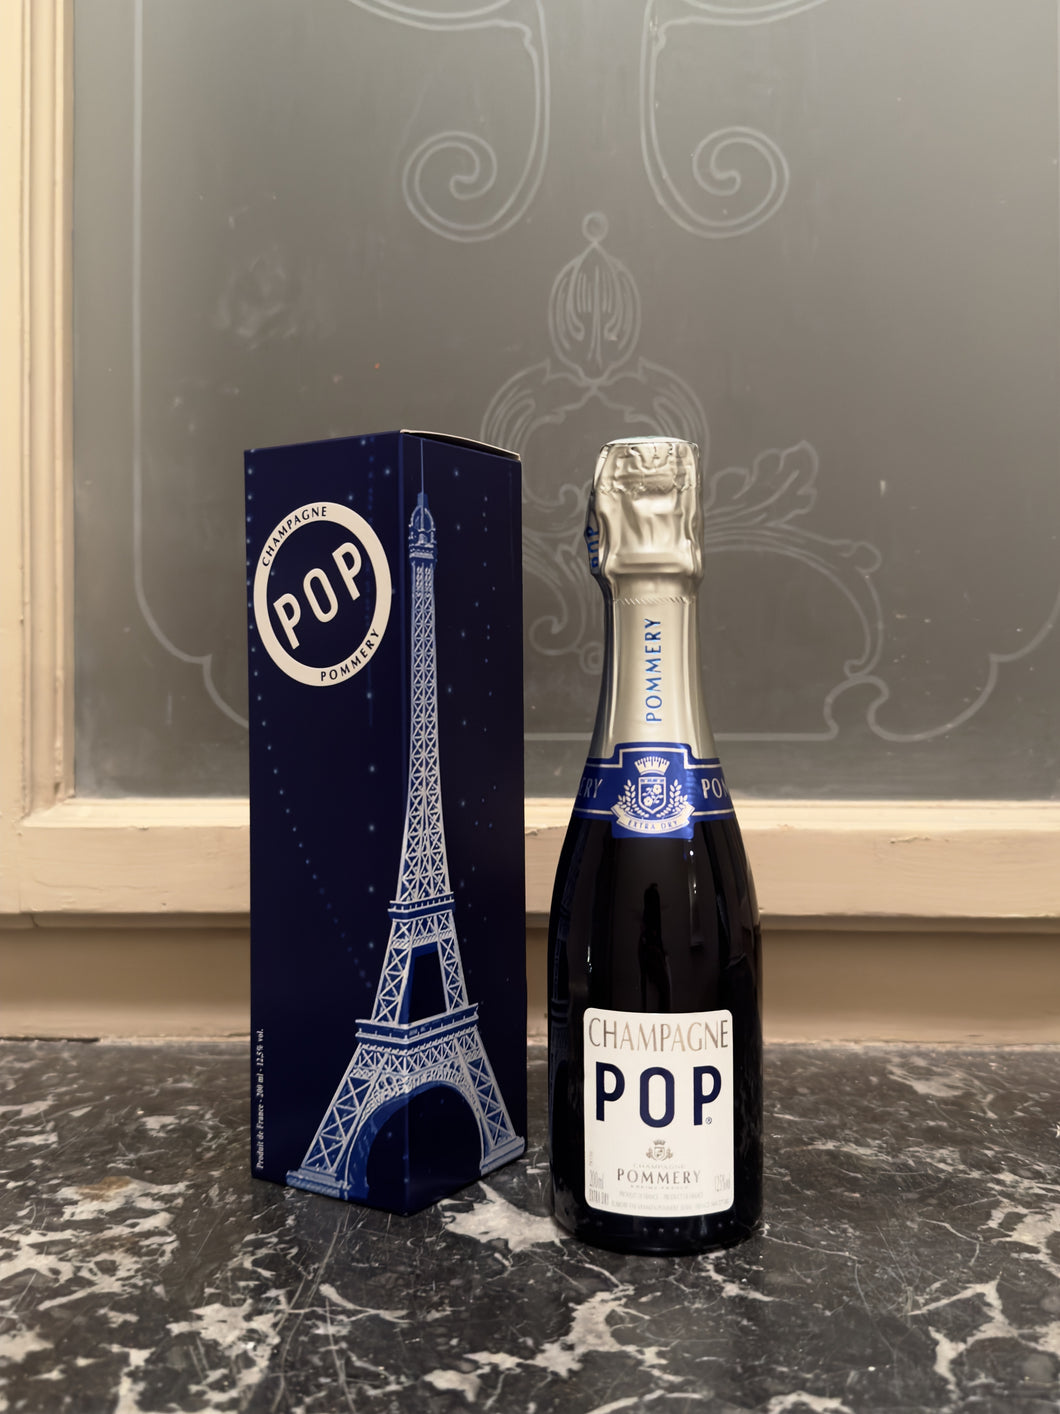 CHAMPAGNE POMMERY POP EXTRA DRY TOUR EIFFEL 20 cL GIFT BOX